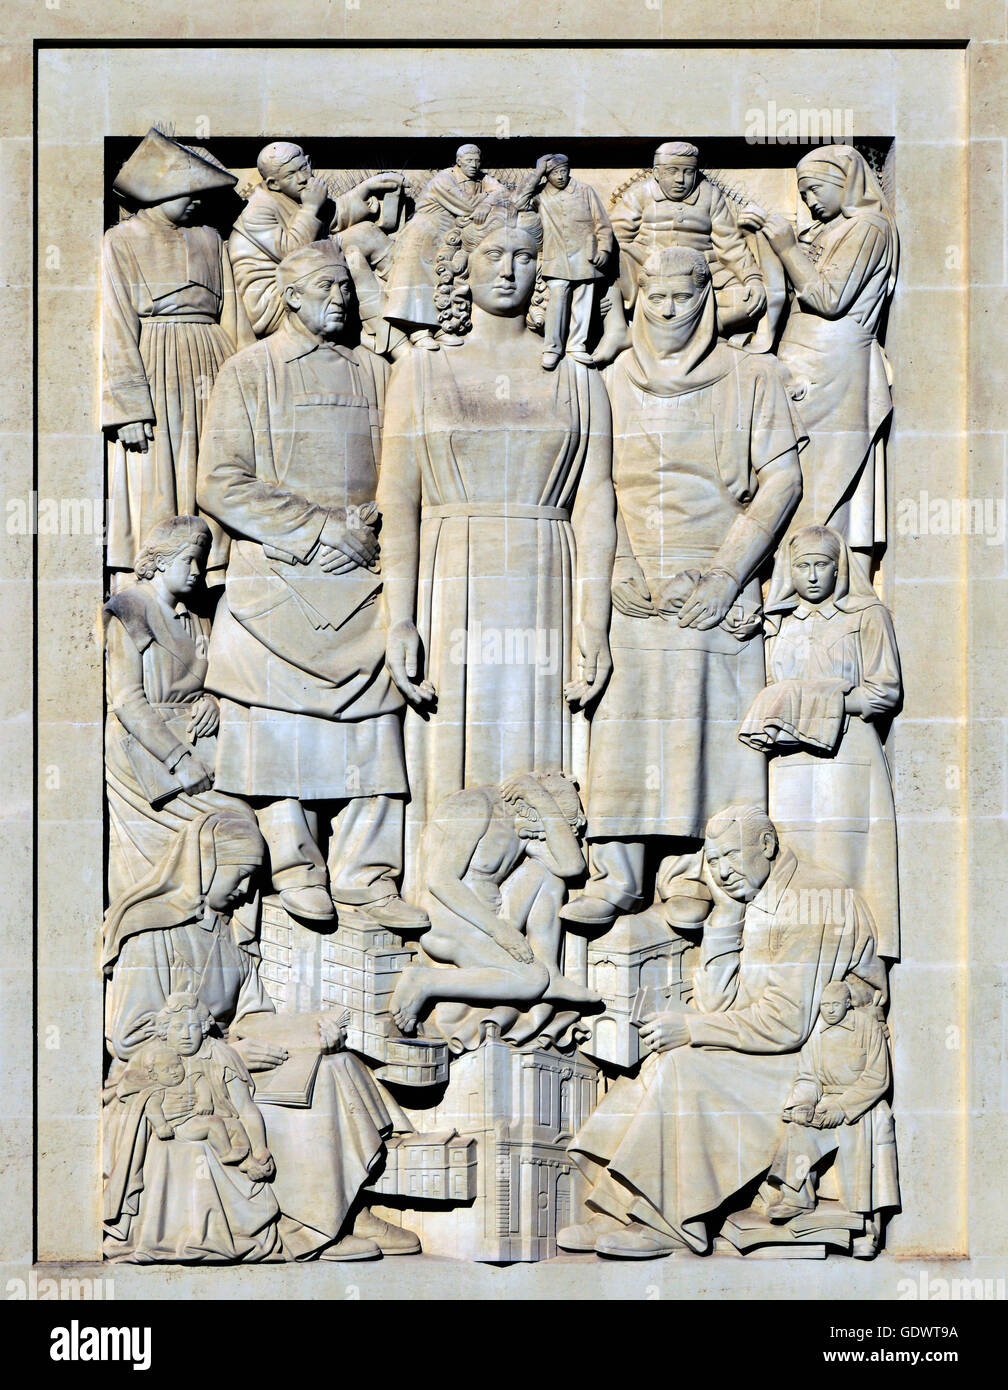 Reliefs of Joachim Costa on the facade of the old St. Charles Hospital rehabilitated dwelling residence in Montpellier, France. Stock Photo